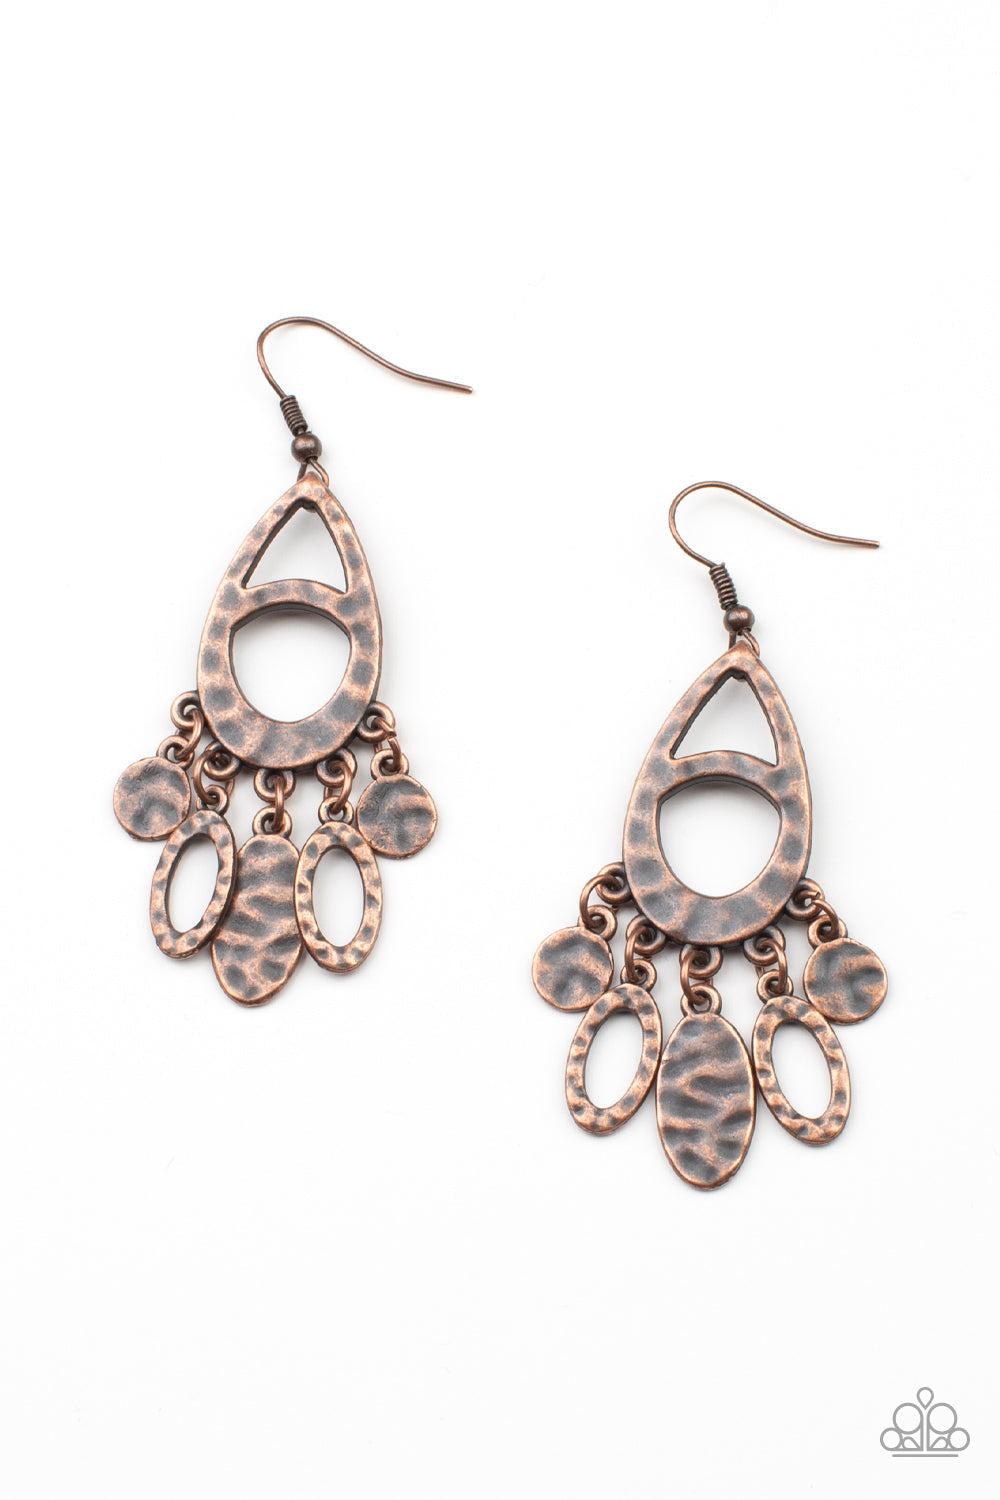 PLAINS Jane Copper Earrings - Paparazzi Accessories- lightbox - CarasShop.com - $5 Jewelry by Cara Jewels